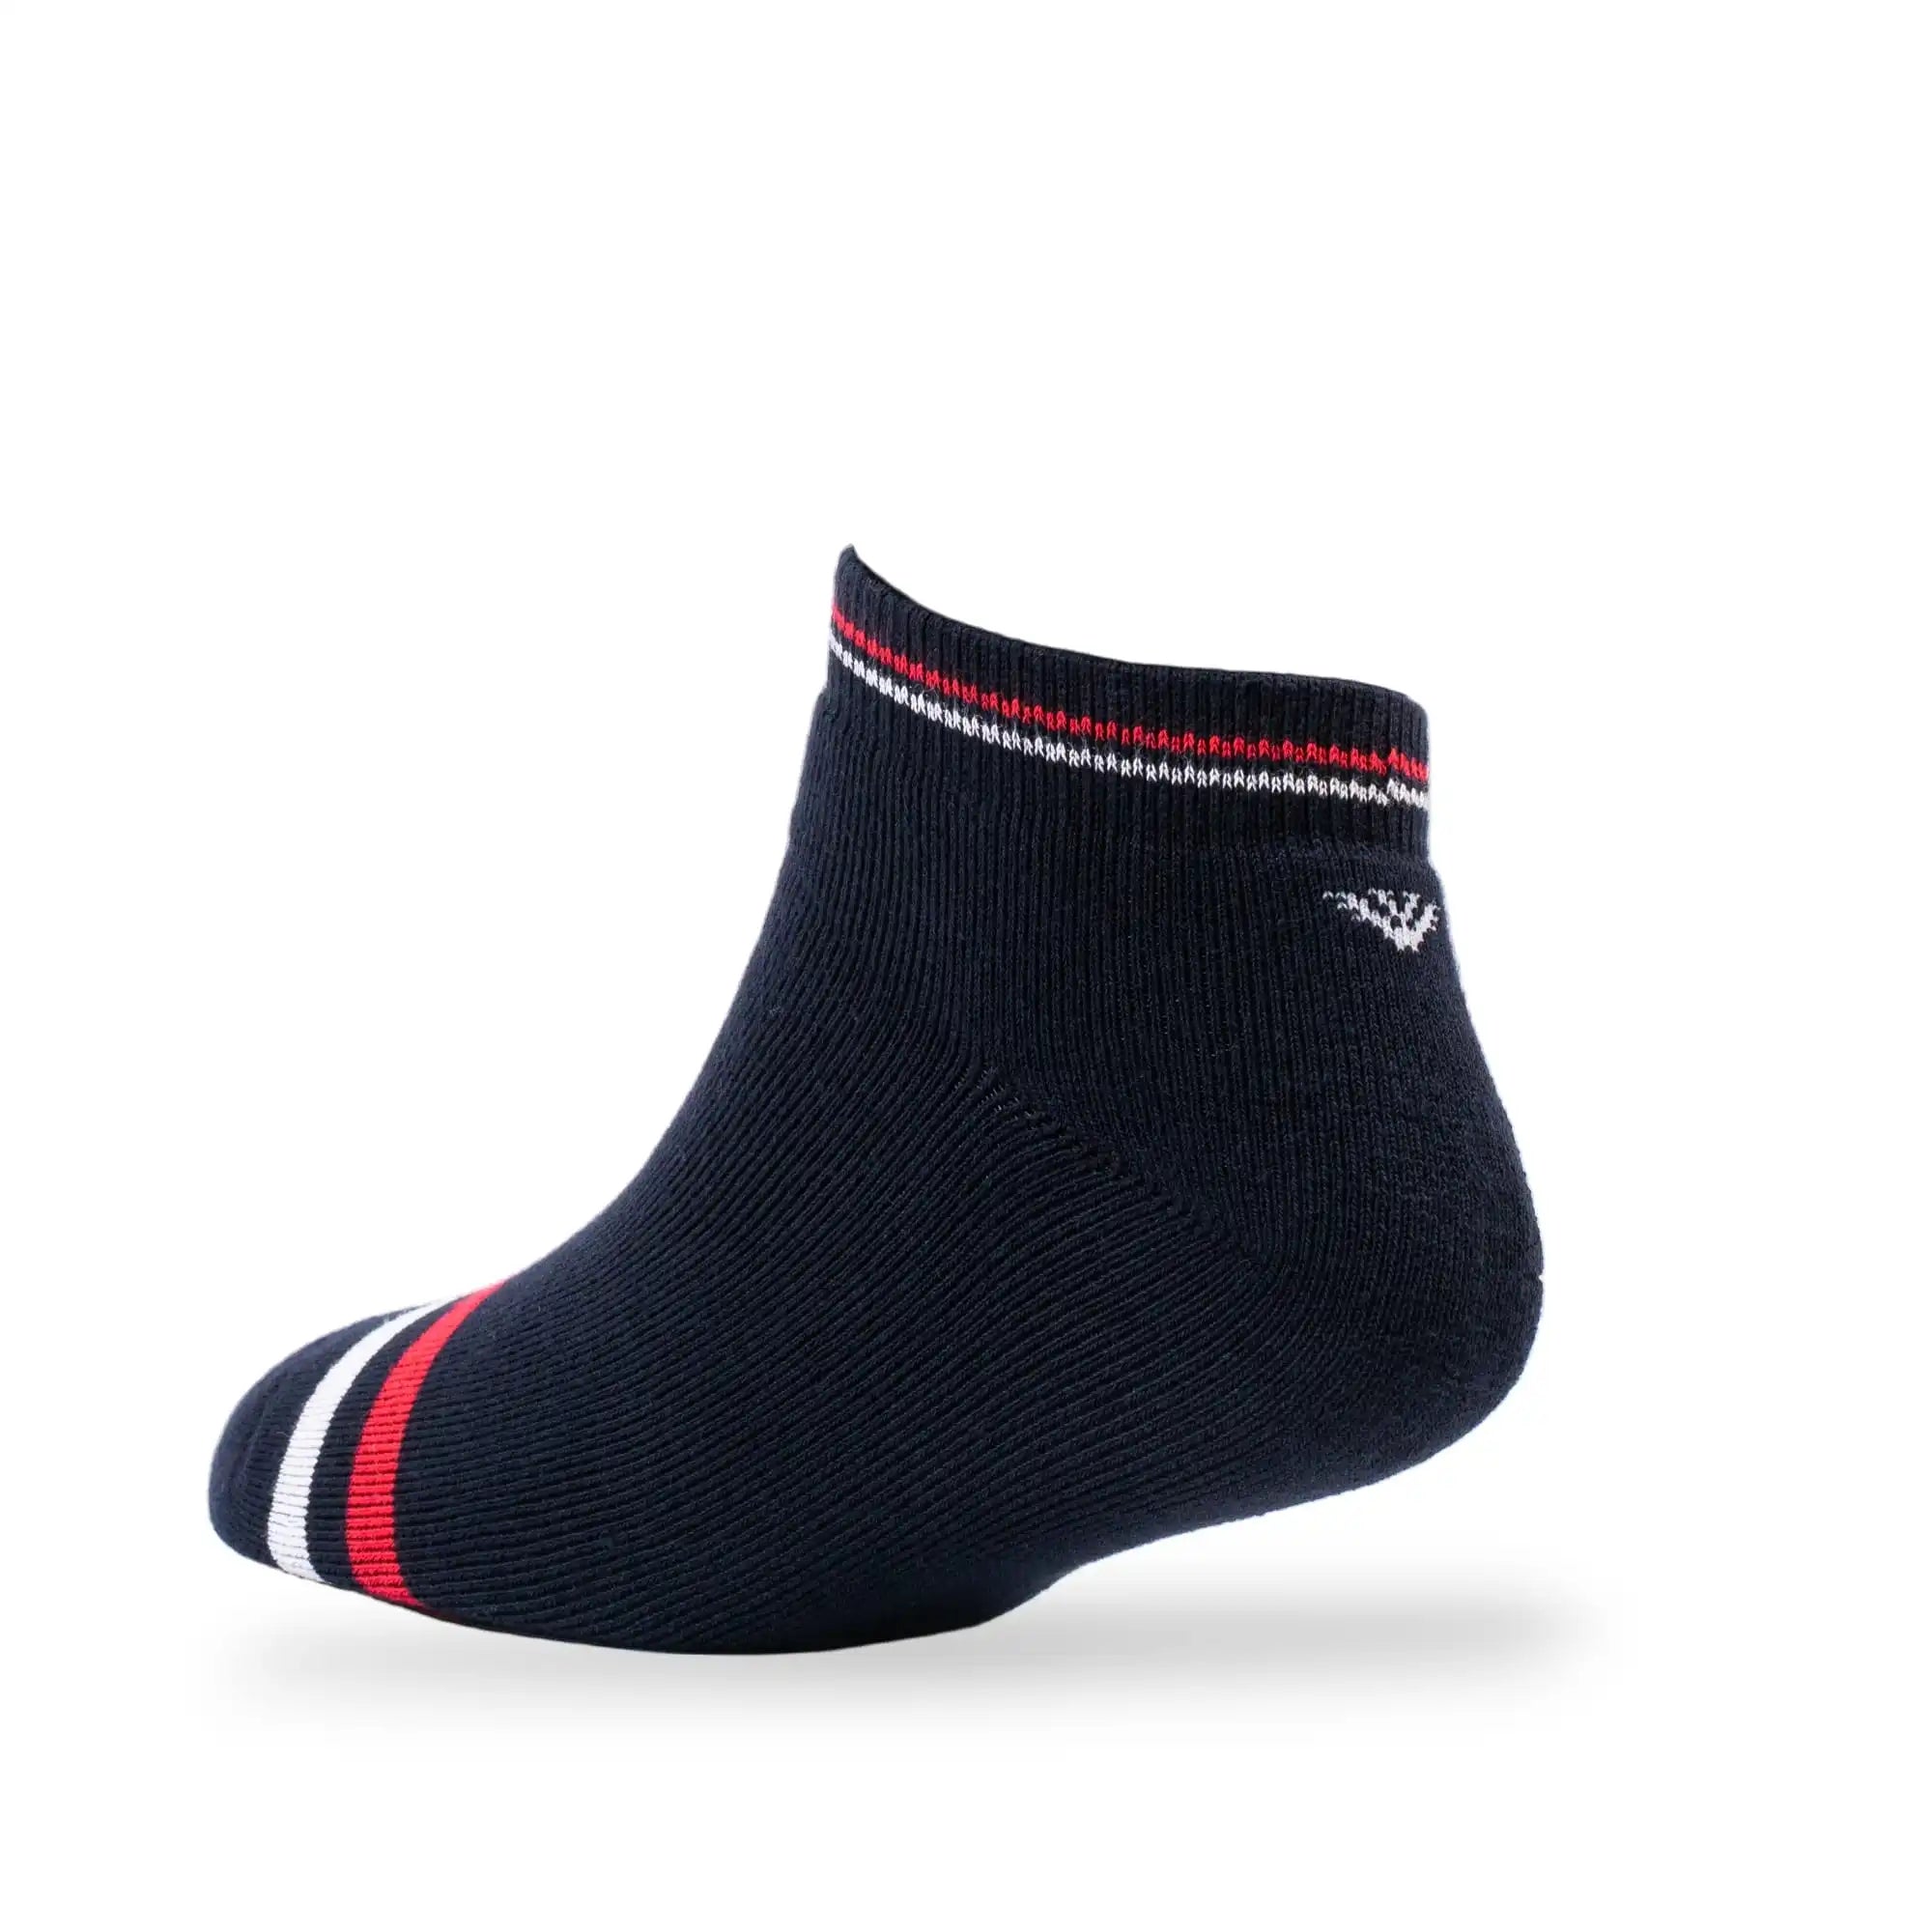 Young Wings Men's Multi Colour Cotton Fabric Design Low Ankle Length Socks - Pack of 3, Style no. 1603-M1